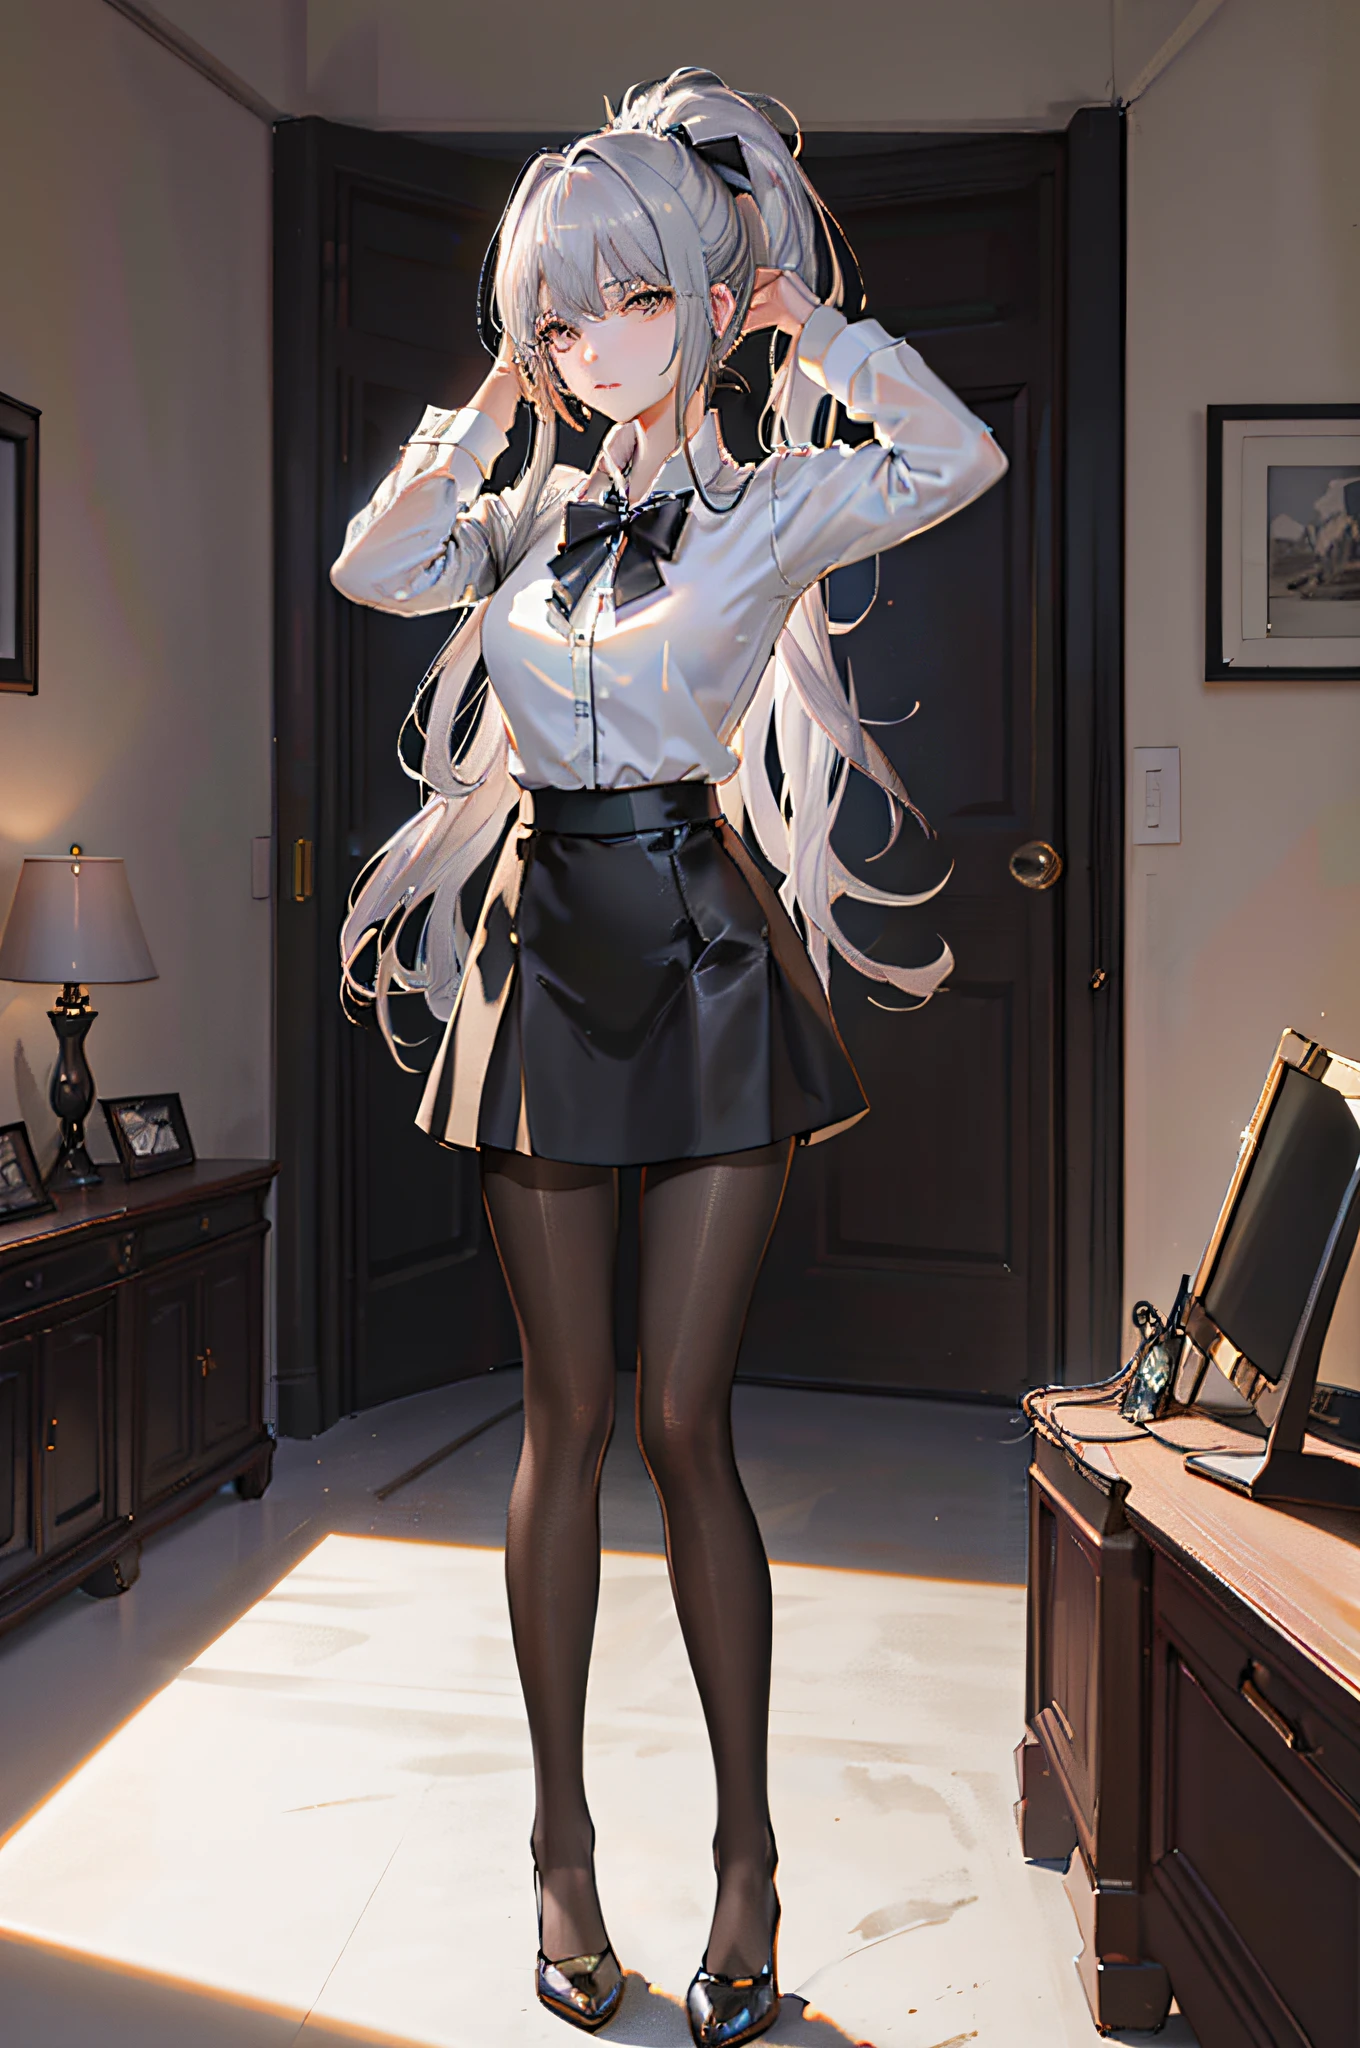 ((1 girl)),((high detailhyper quality,high resolution,))),(epic detail)),((soft shadows)),(ray tracing),{best shadow}, detailed background, ((living room)),((fluffy silver hair, busty slender girl with high ponytail)))), [avoid golden eyes in an ominous living room], (((Girl wears white shirt, black wrinkle skirt with black transparent pantyhose))), {shows a delicate slim figure and graceful curves}, movements: (standing), ((((hands behind the head))))), (facial details)